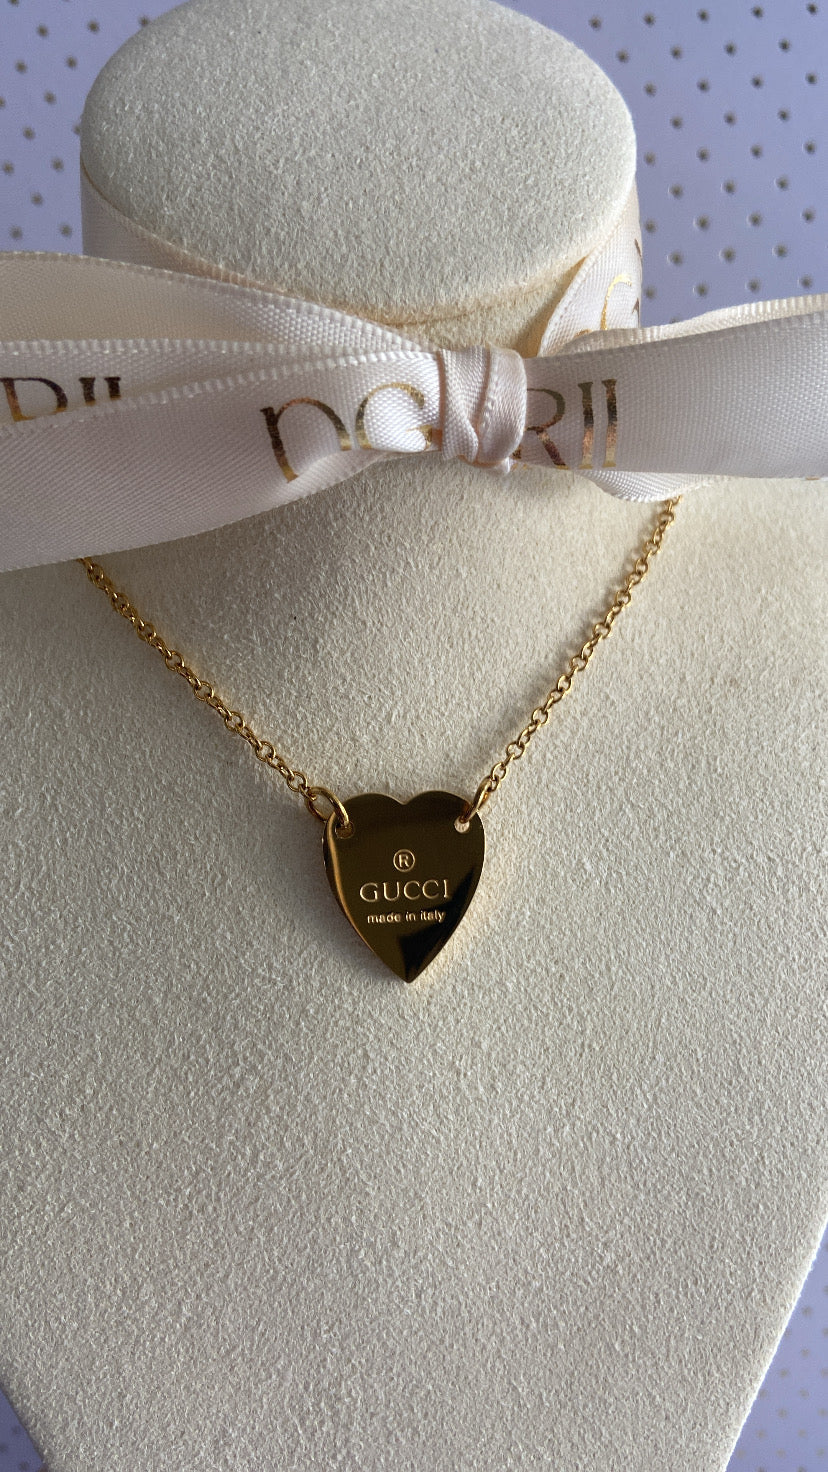 GG HEART NECKLACE GOLD